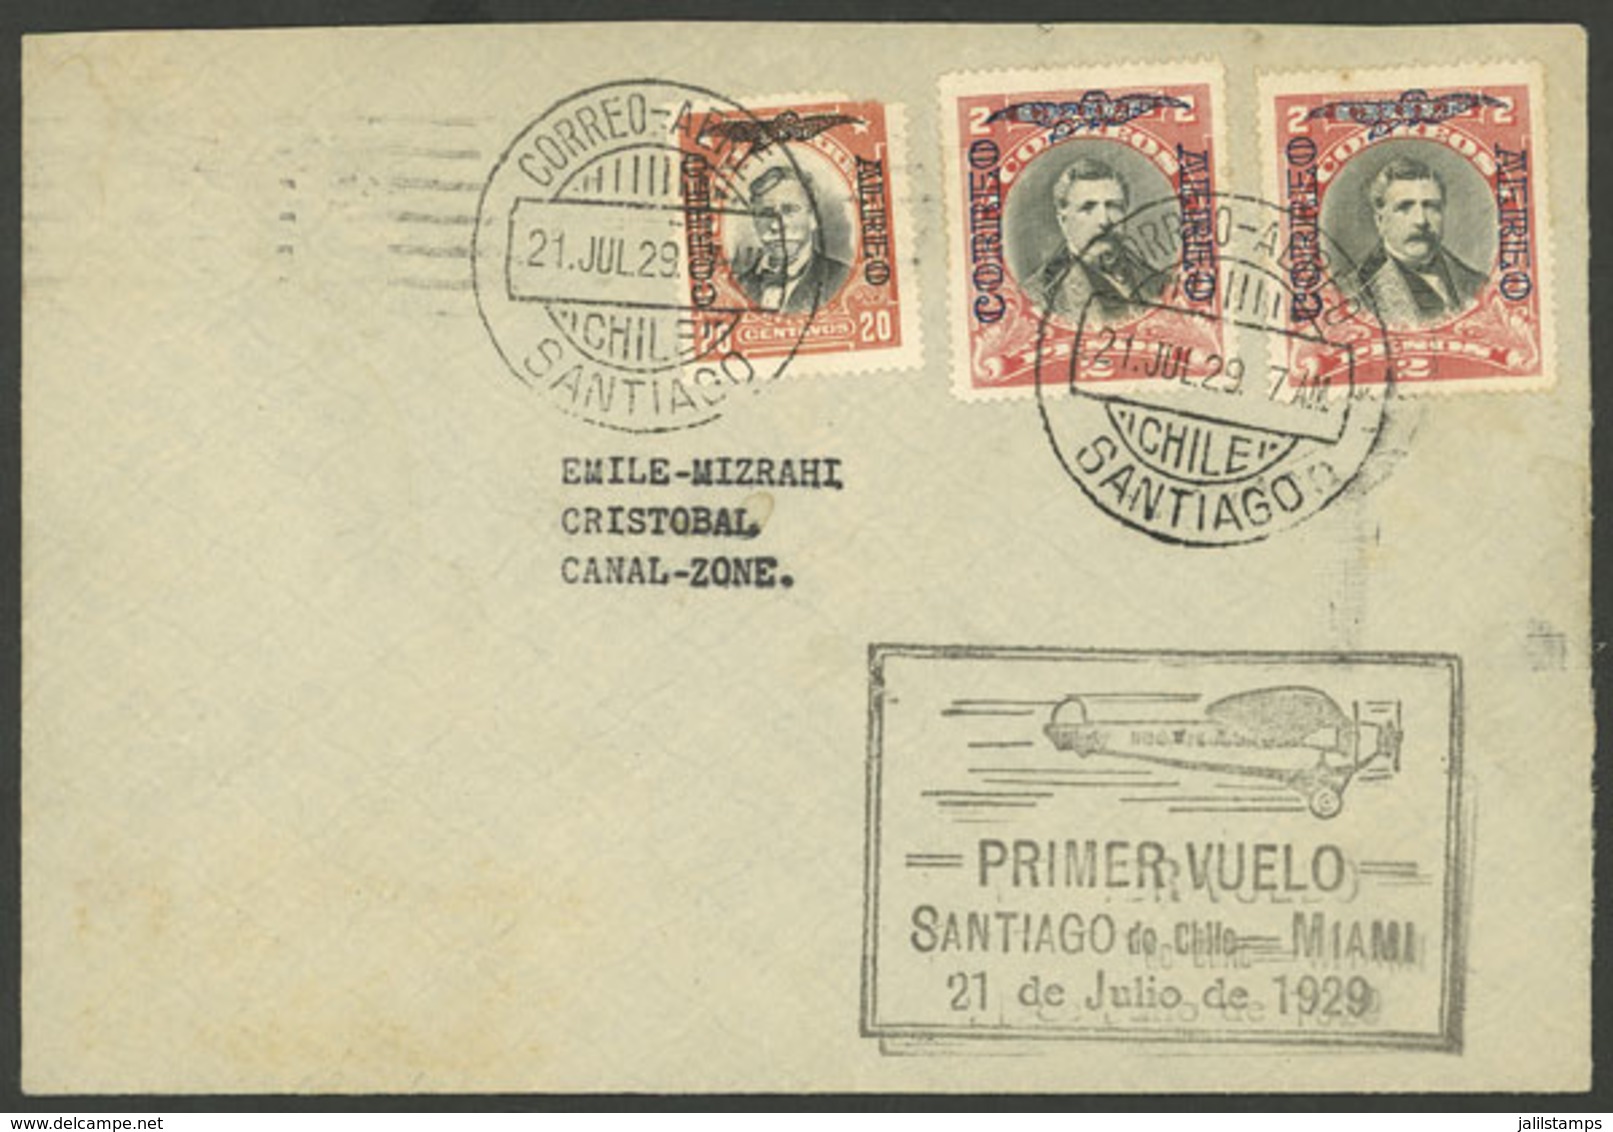 CHILE: 21/JUL/1929 Santiago - Cristobal (Canal Zone), Panagra First Flight, With Special Mark And Arrival Backstamp Of 2 - Chili